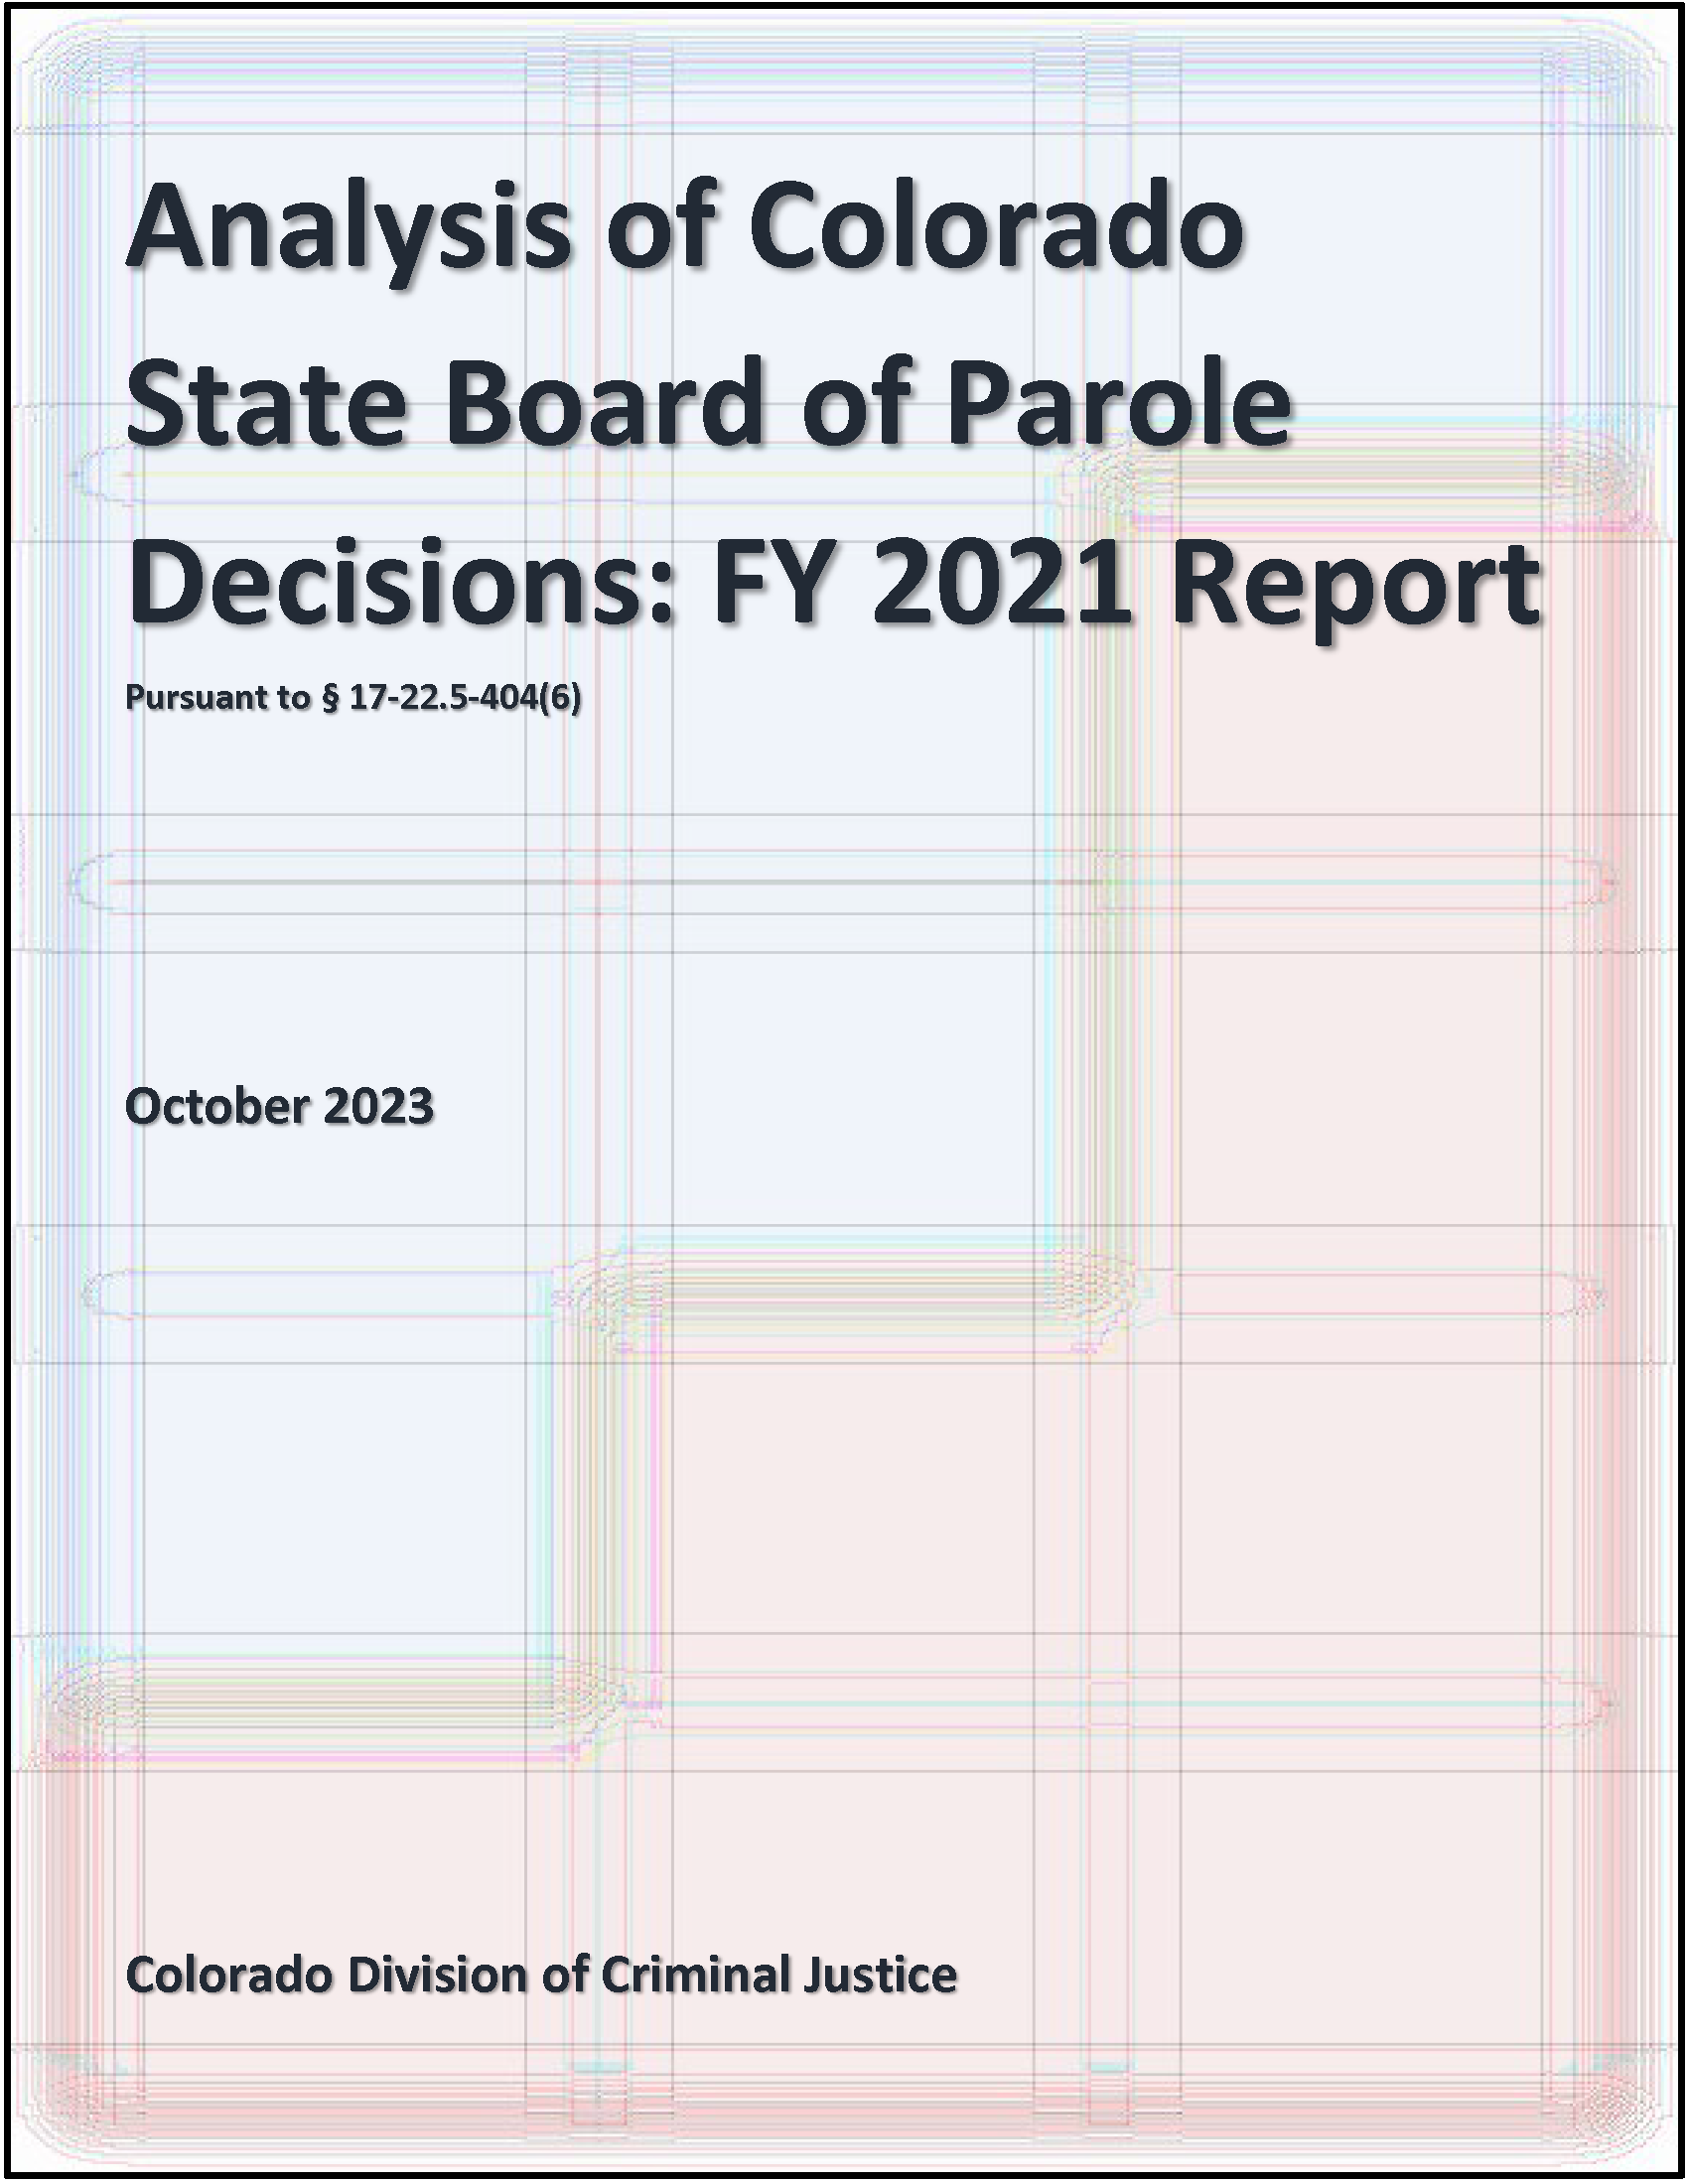 Analysis of Colorado State Board of Parole Decisions: FY 2021 Report